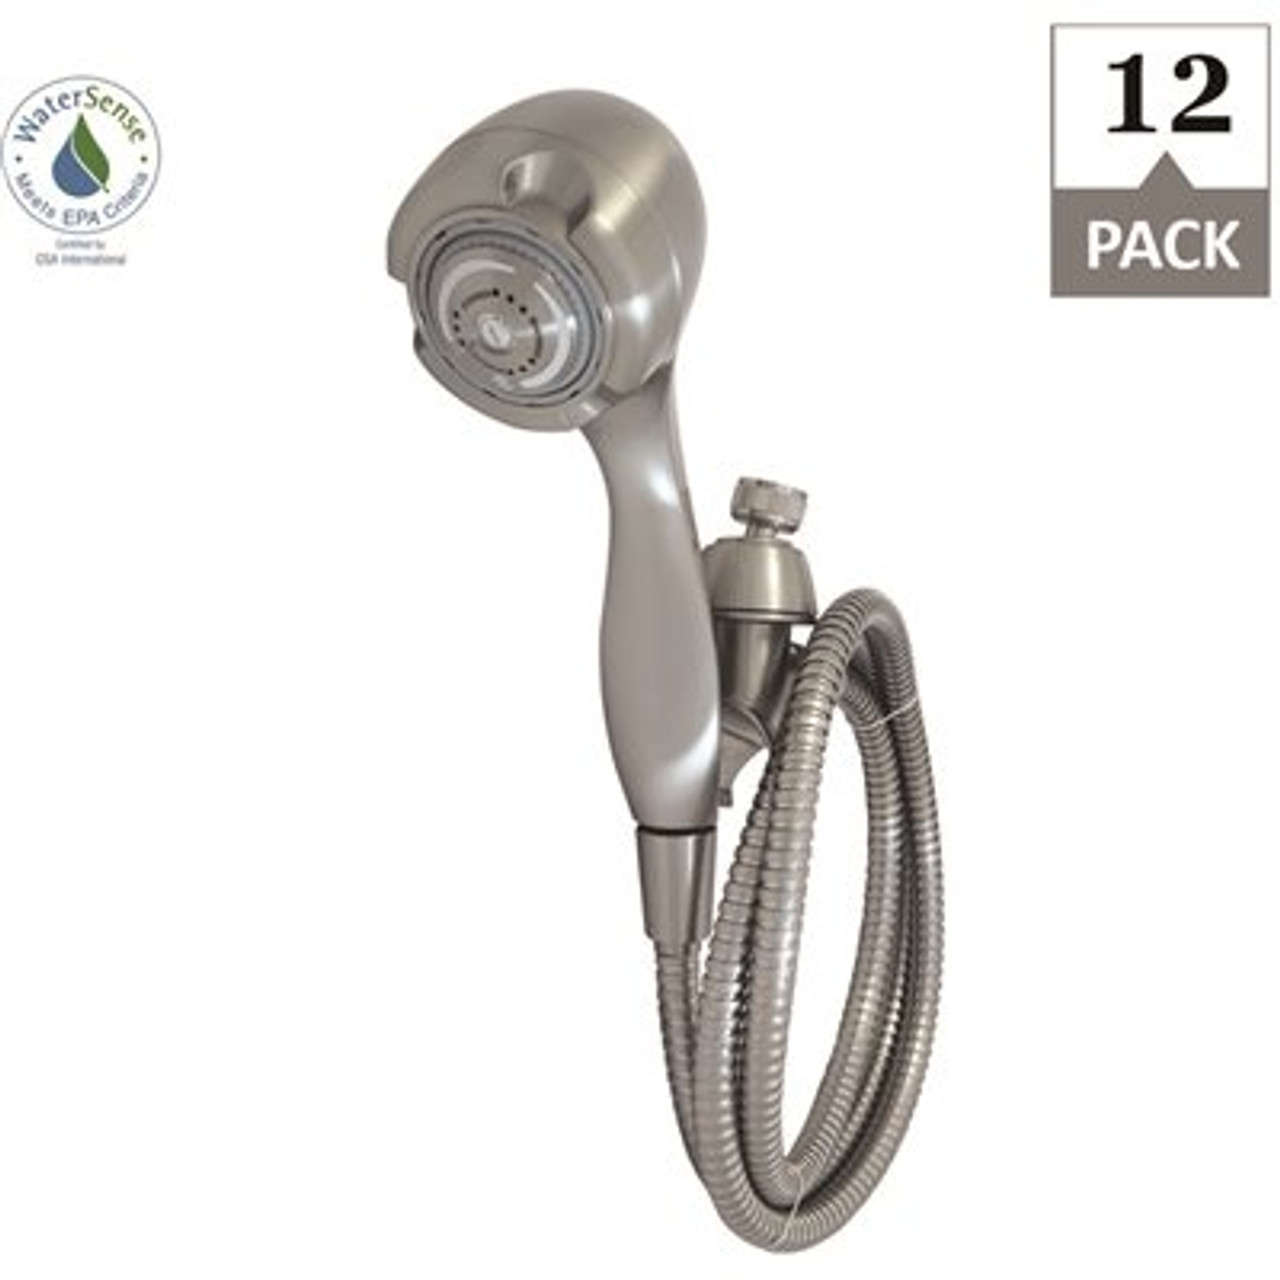 Niagara Conservation Earth 3-Spray 2.7 in. Single Wall Mount Handheld 2.0 GPM Shower Head in Brushed Nickel (12-Pack)